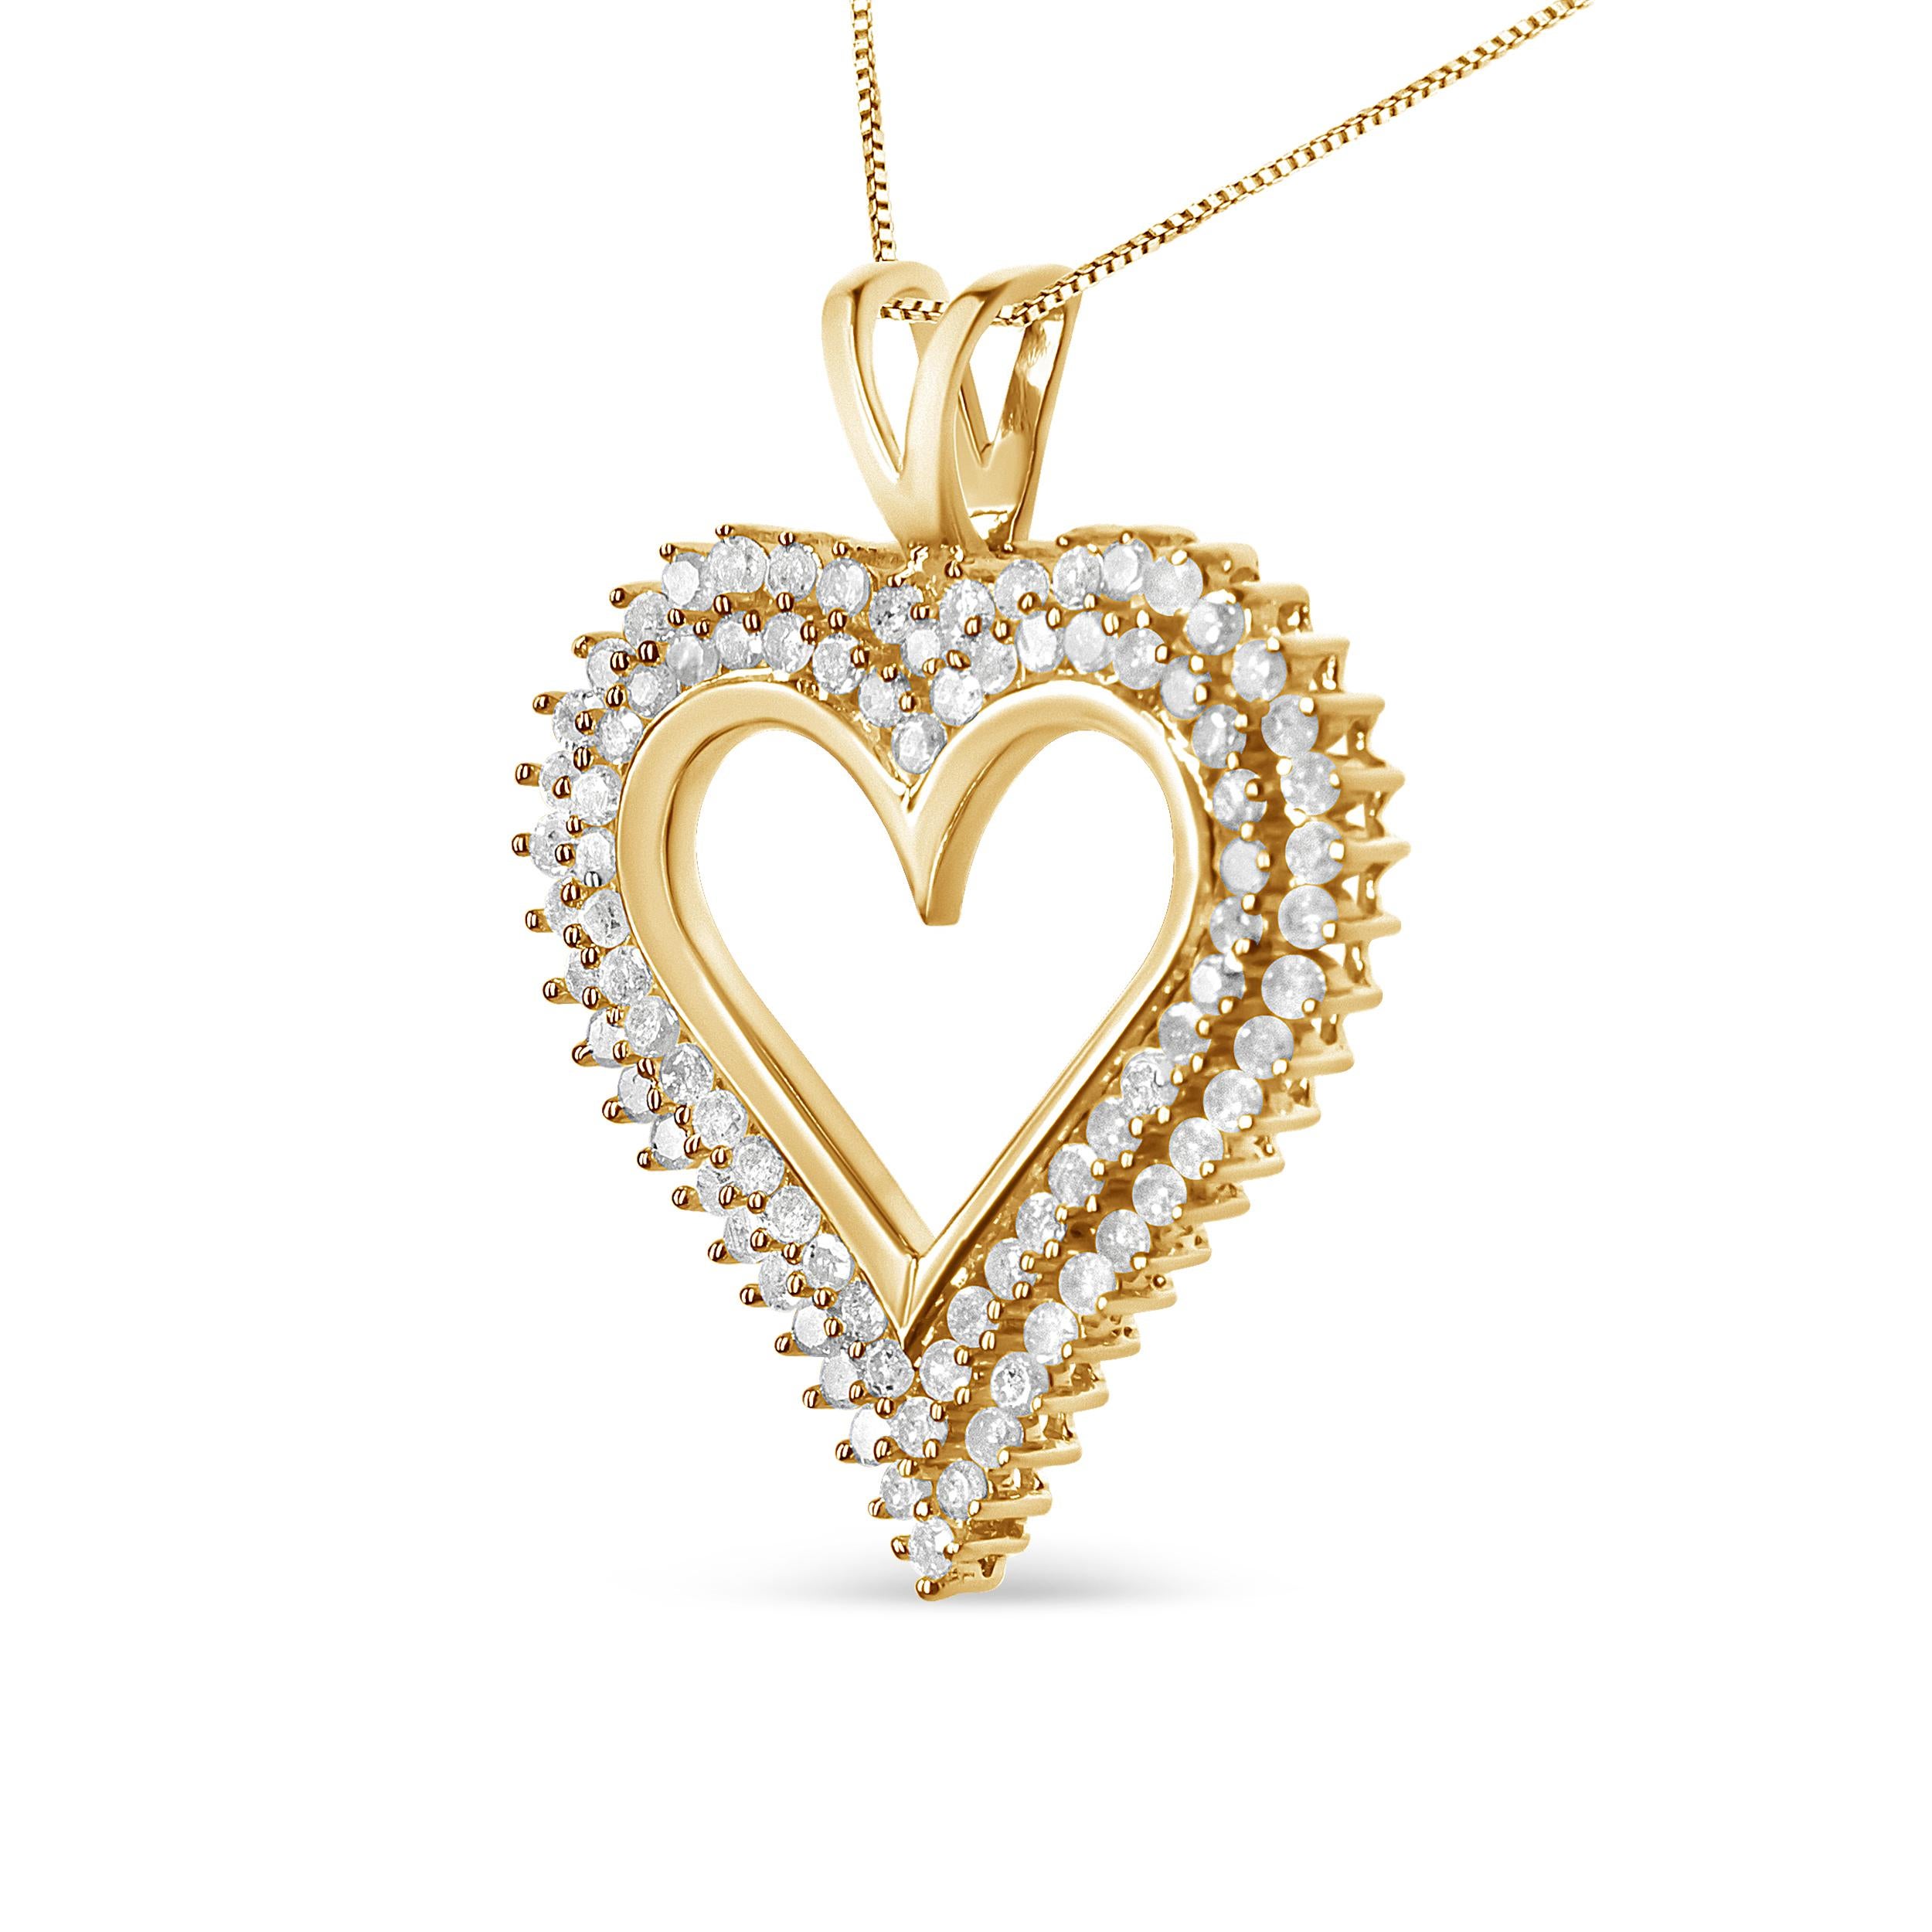 Celebrate someone you love with this stunning diamond heart pendant. This diamond necklace features 2 rows of round diamonds prong set along the edge of this open heart shape crafted of stunning .925 sterling silver, with a matching box chain